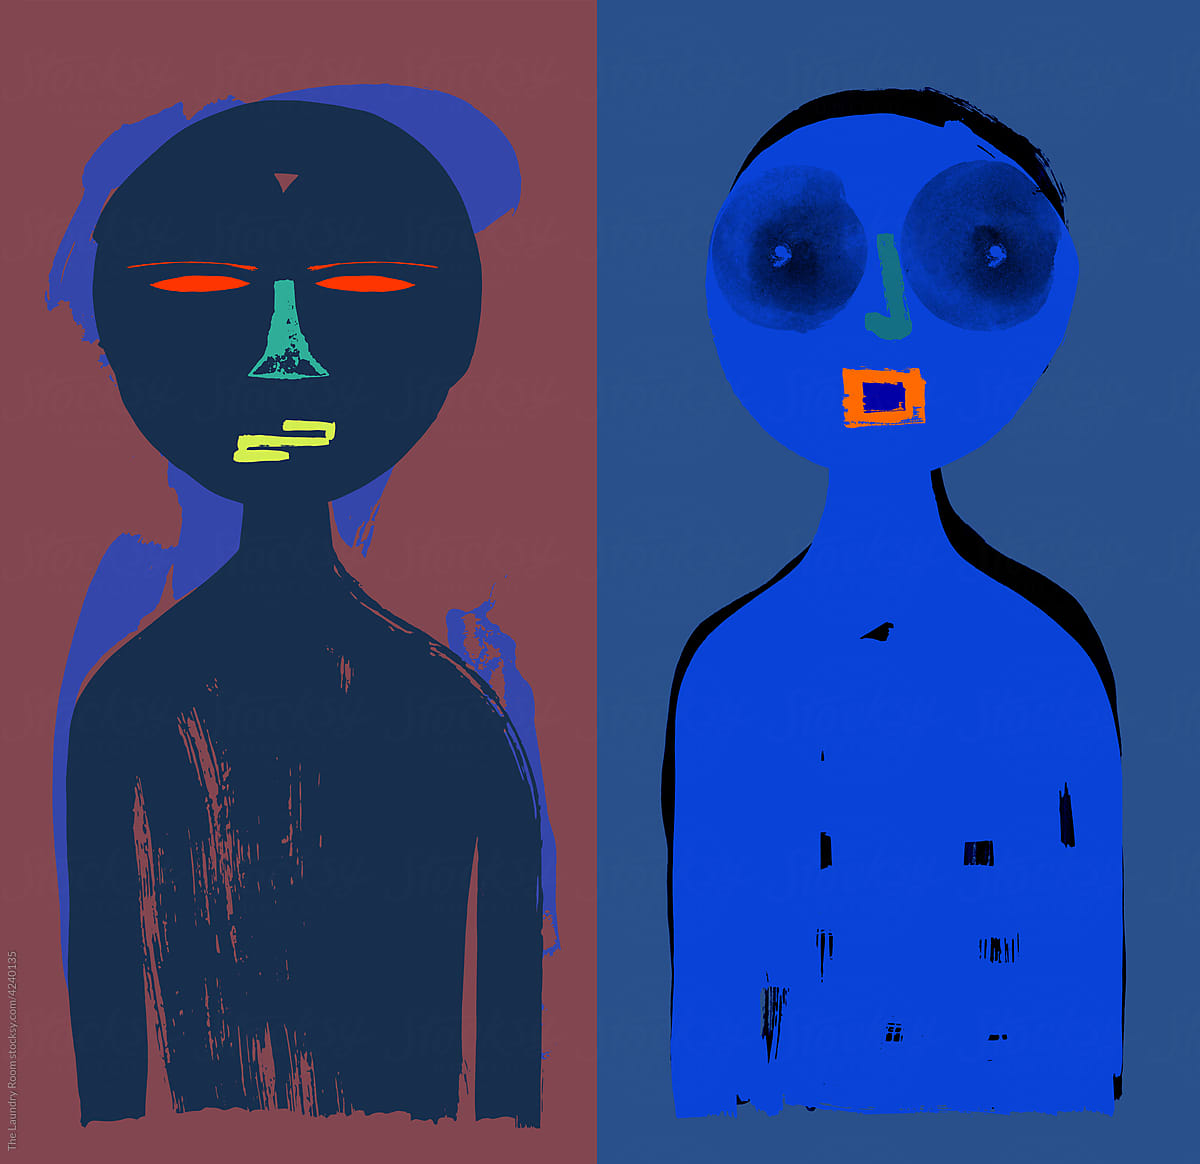 Diptych Portraying Two People - Stylized Illustration